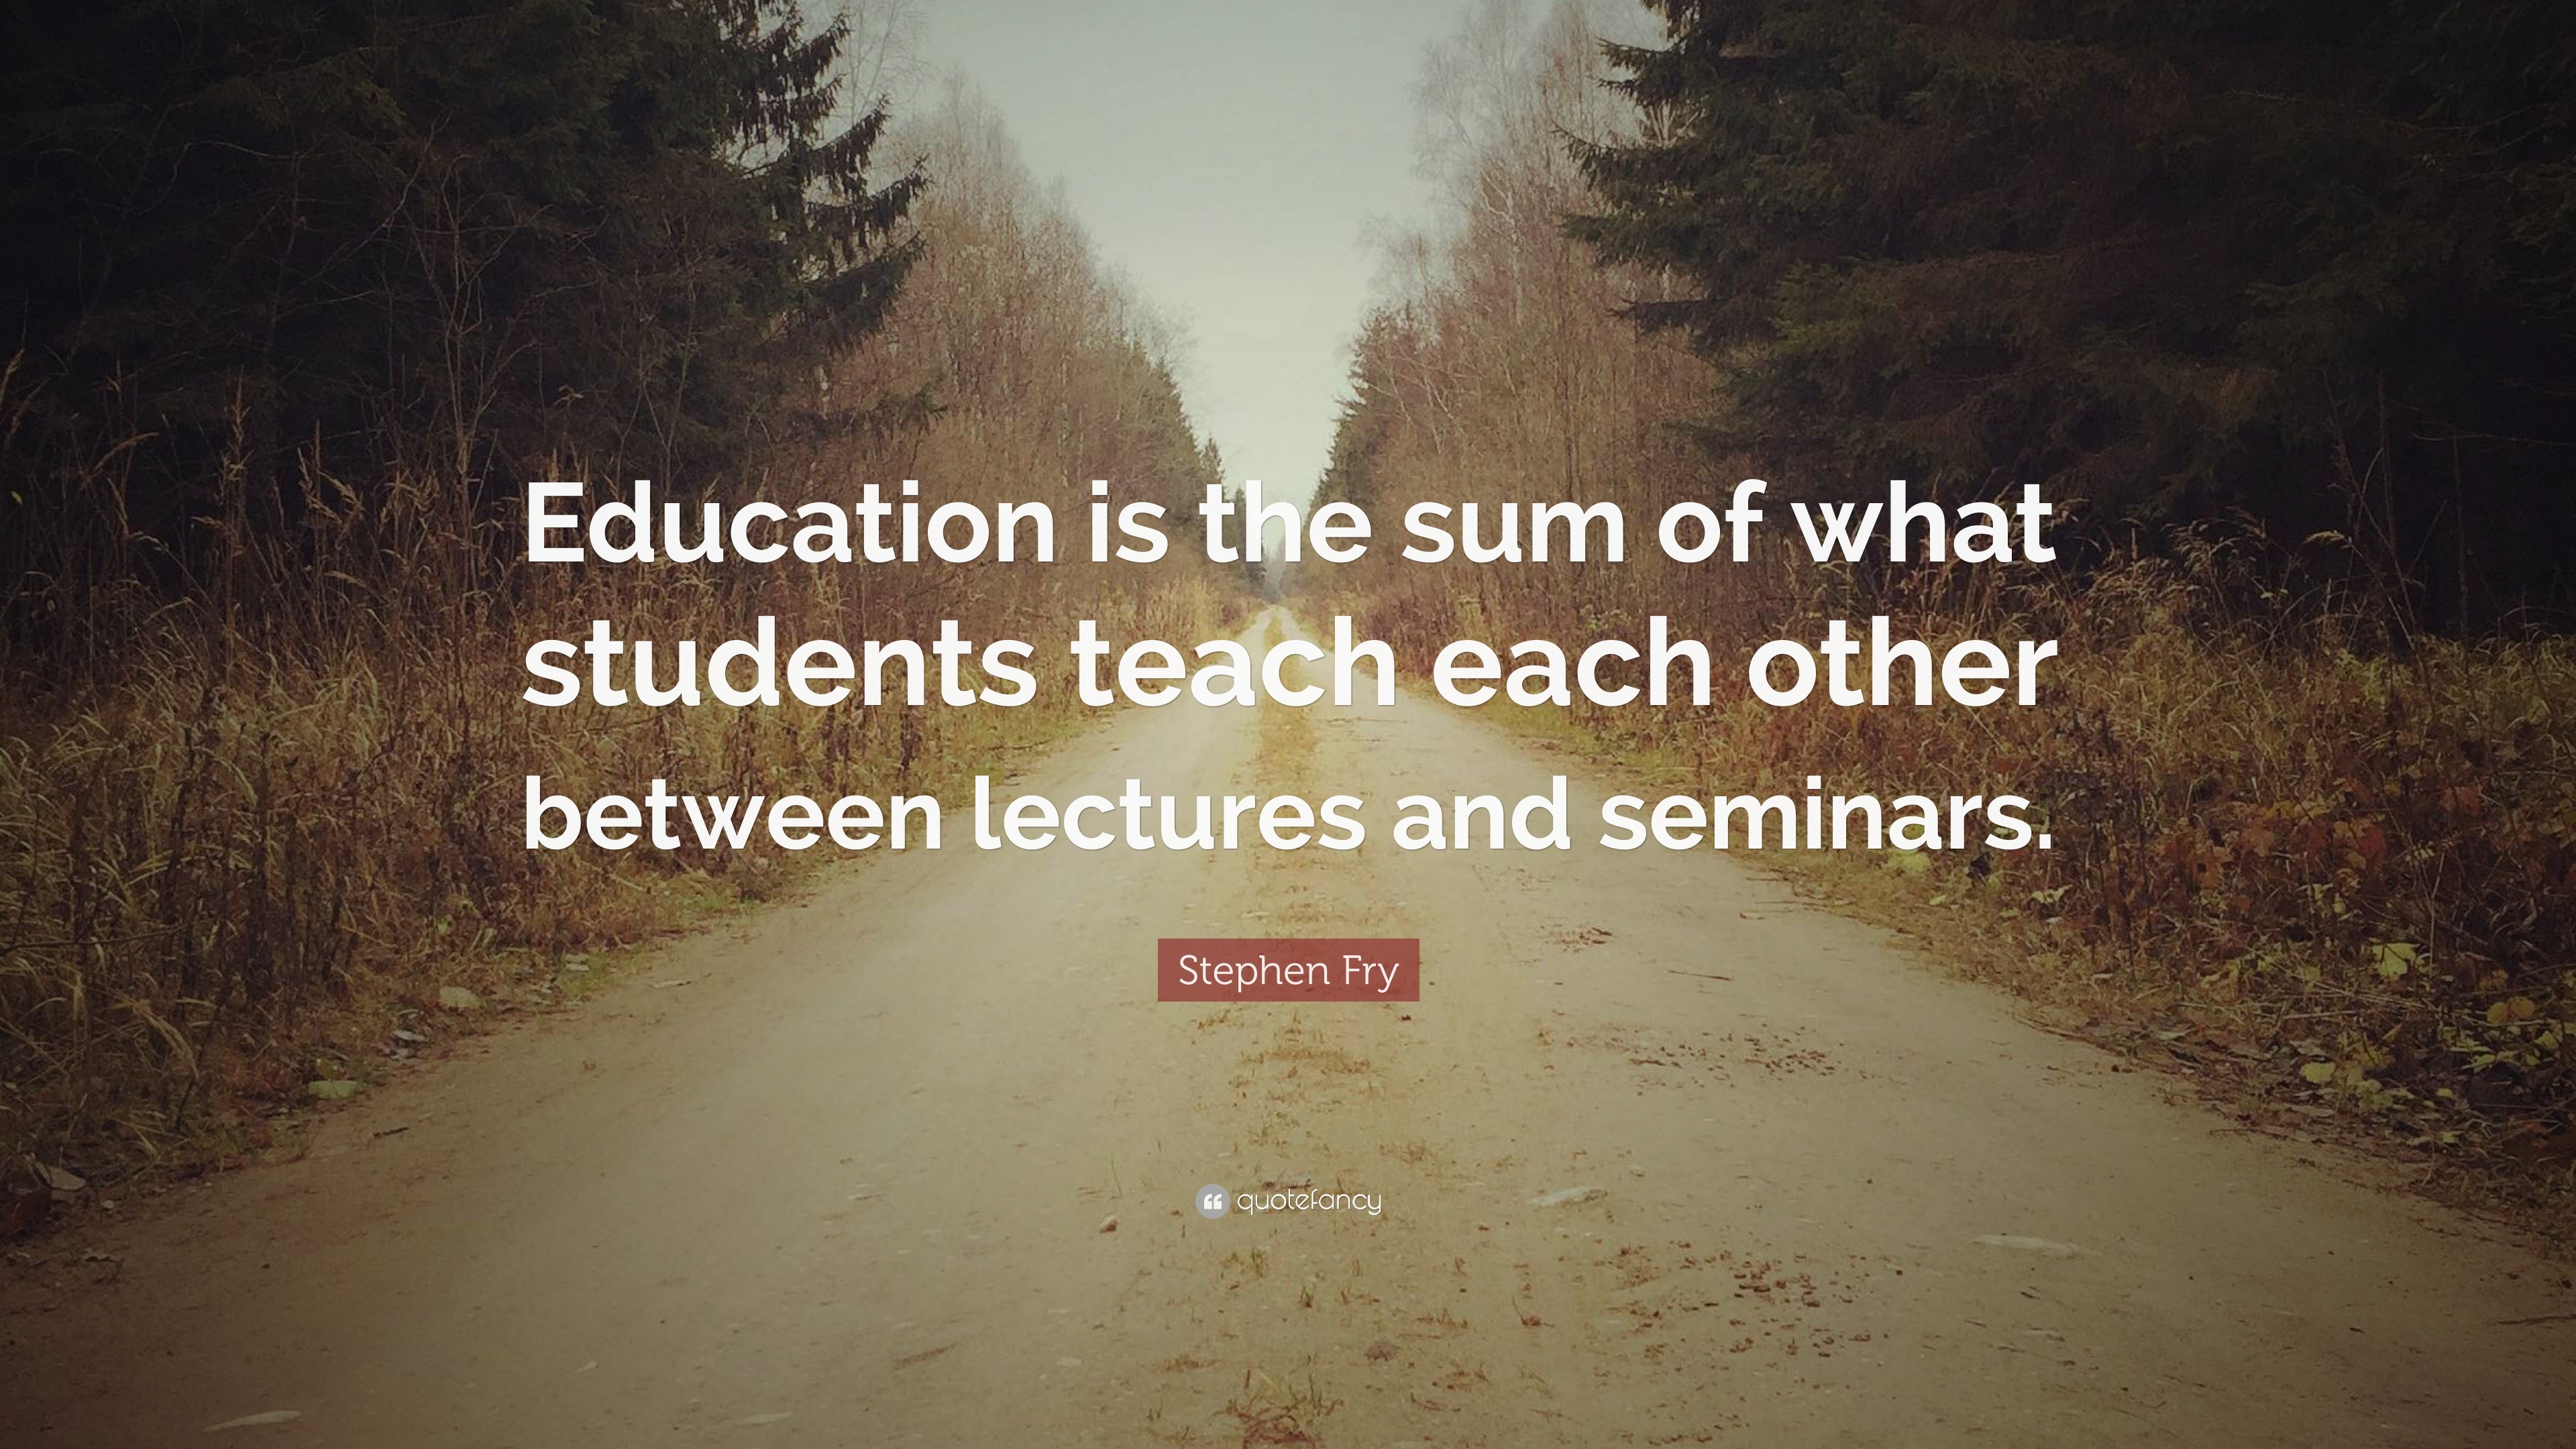 Stephen Fry Quote: “Education is the sum of what students teach each ...